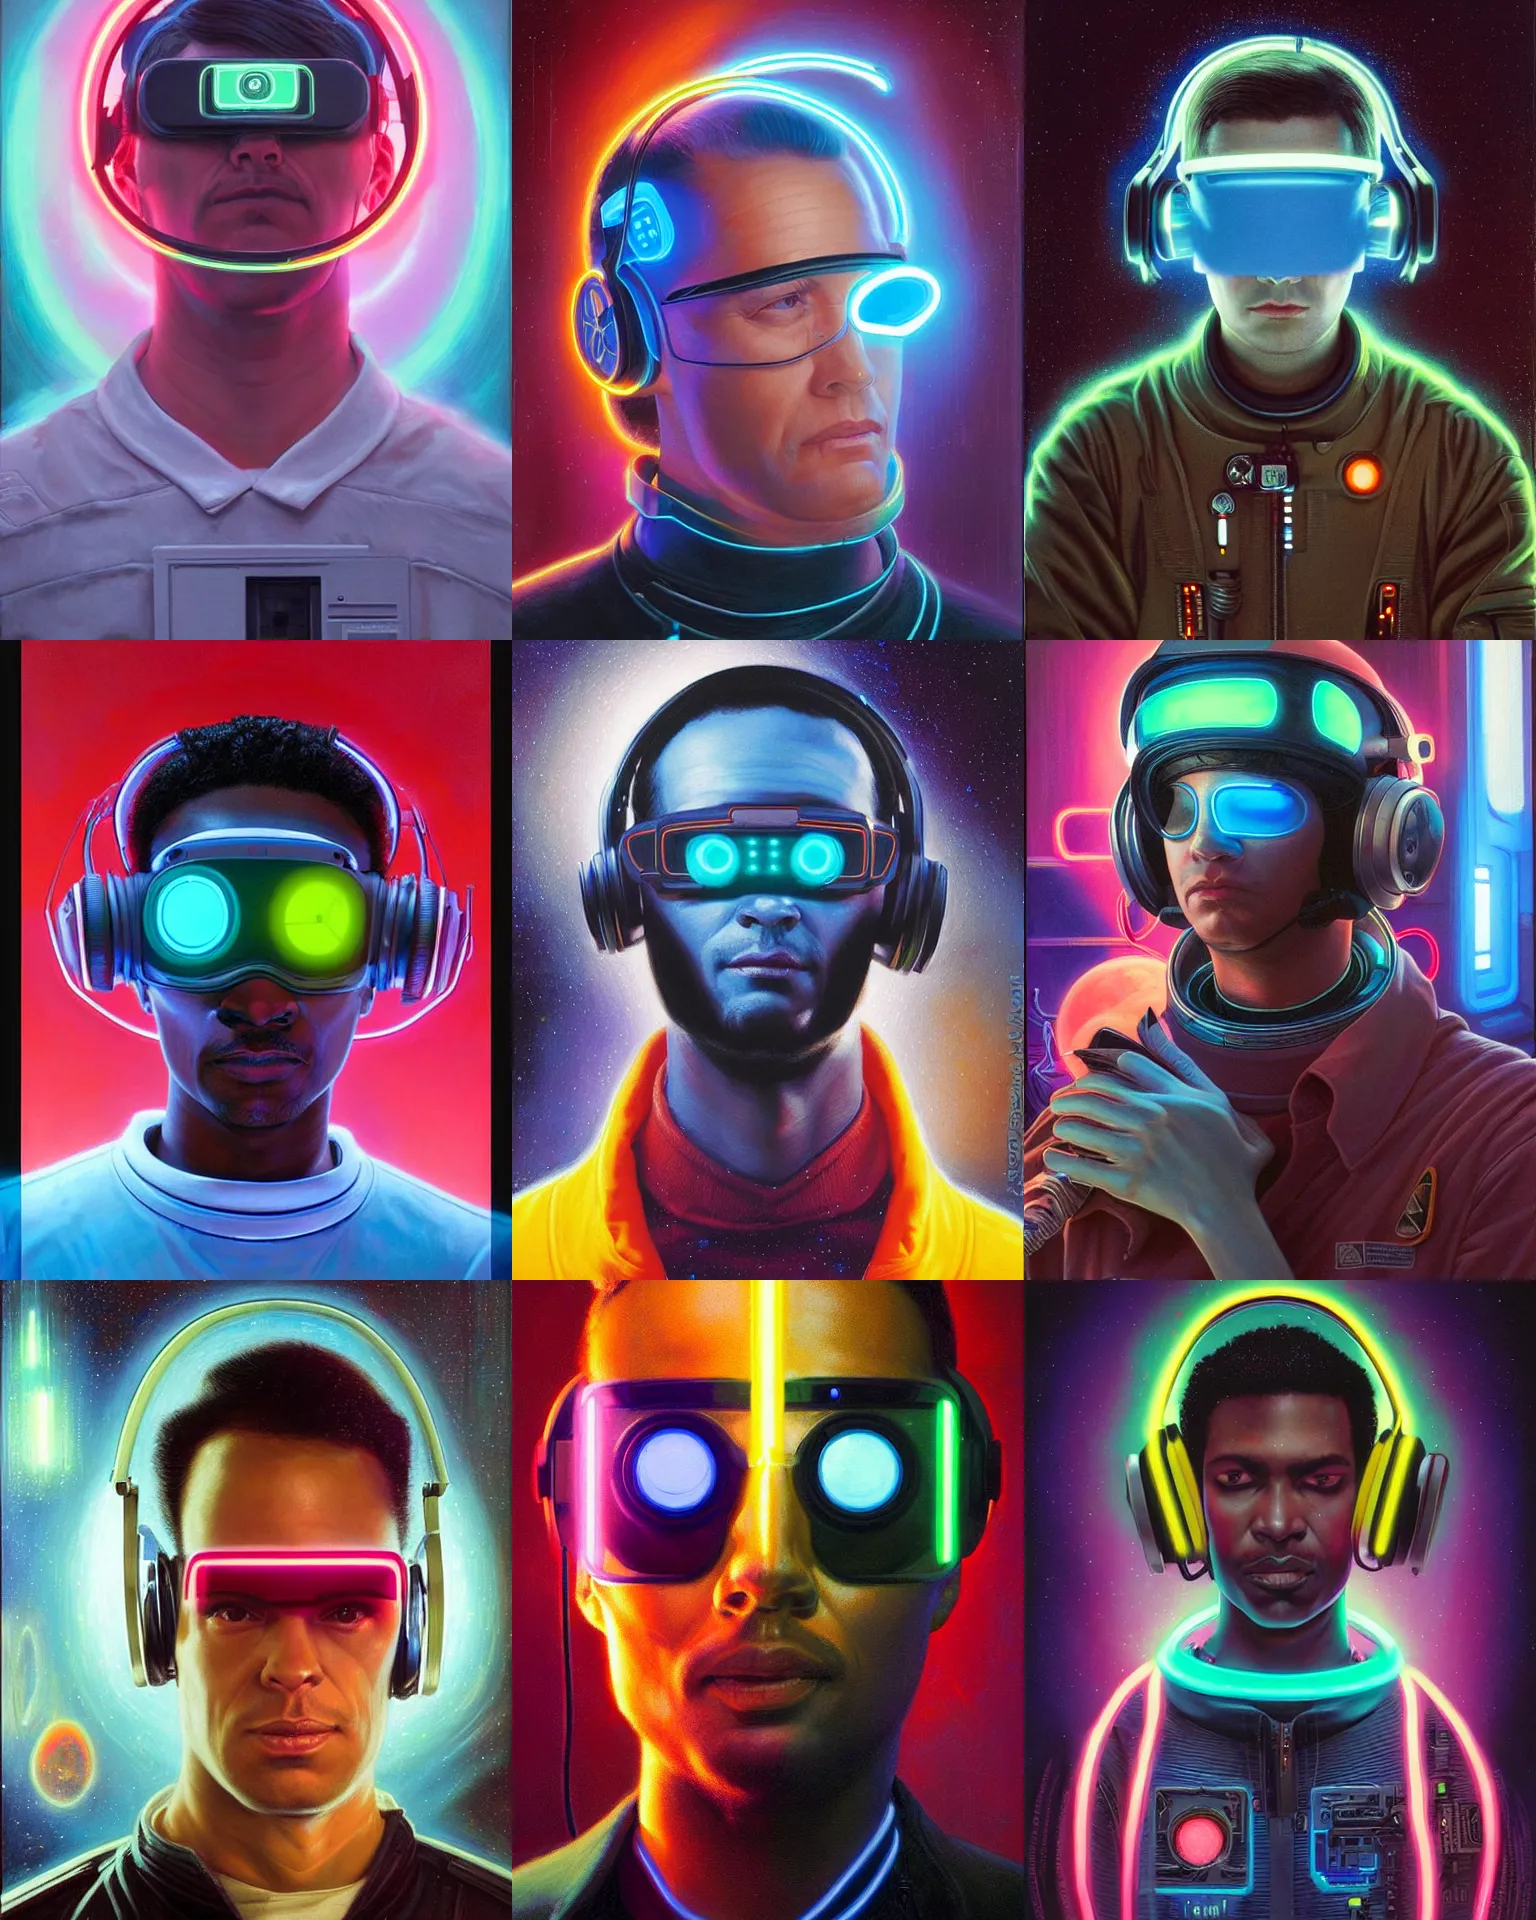 Prompt: neon cyberpunk programmer with glowing geordi cyclops visor over eyes and sleek headphones headshot desaturated profile portrait painting by donato giancola, dean cornwall, rhads, tom whalen, alex grey astronaut fashion photography